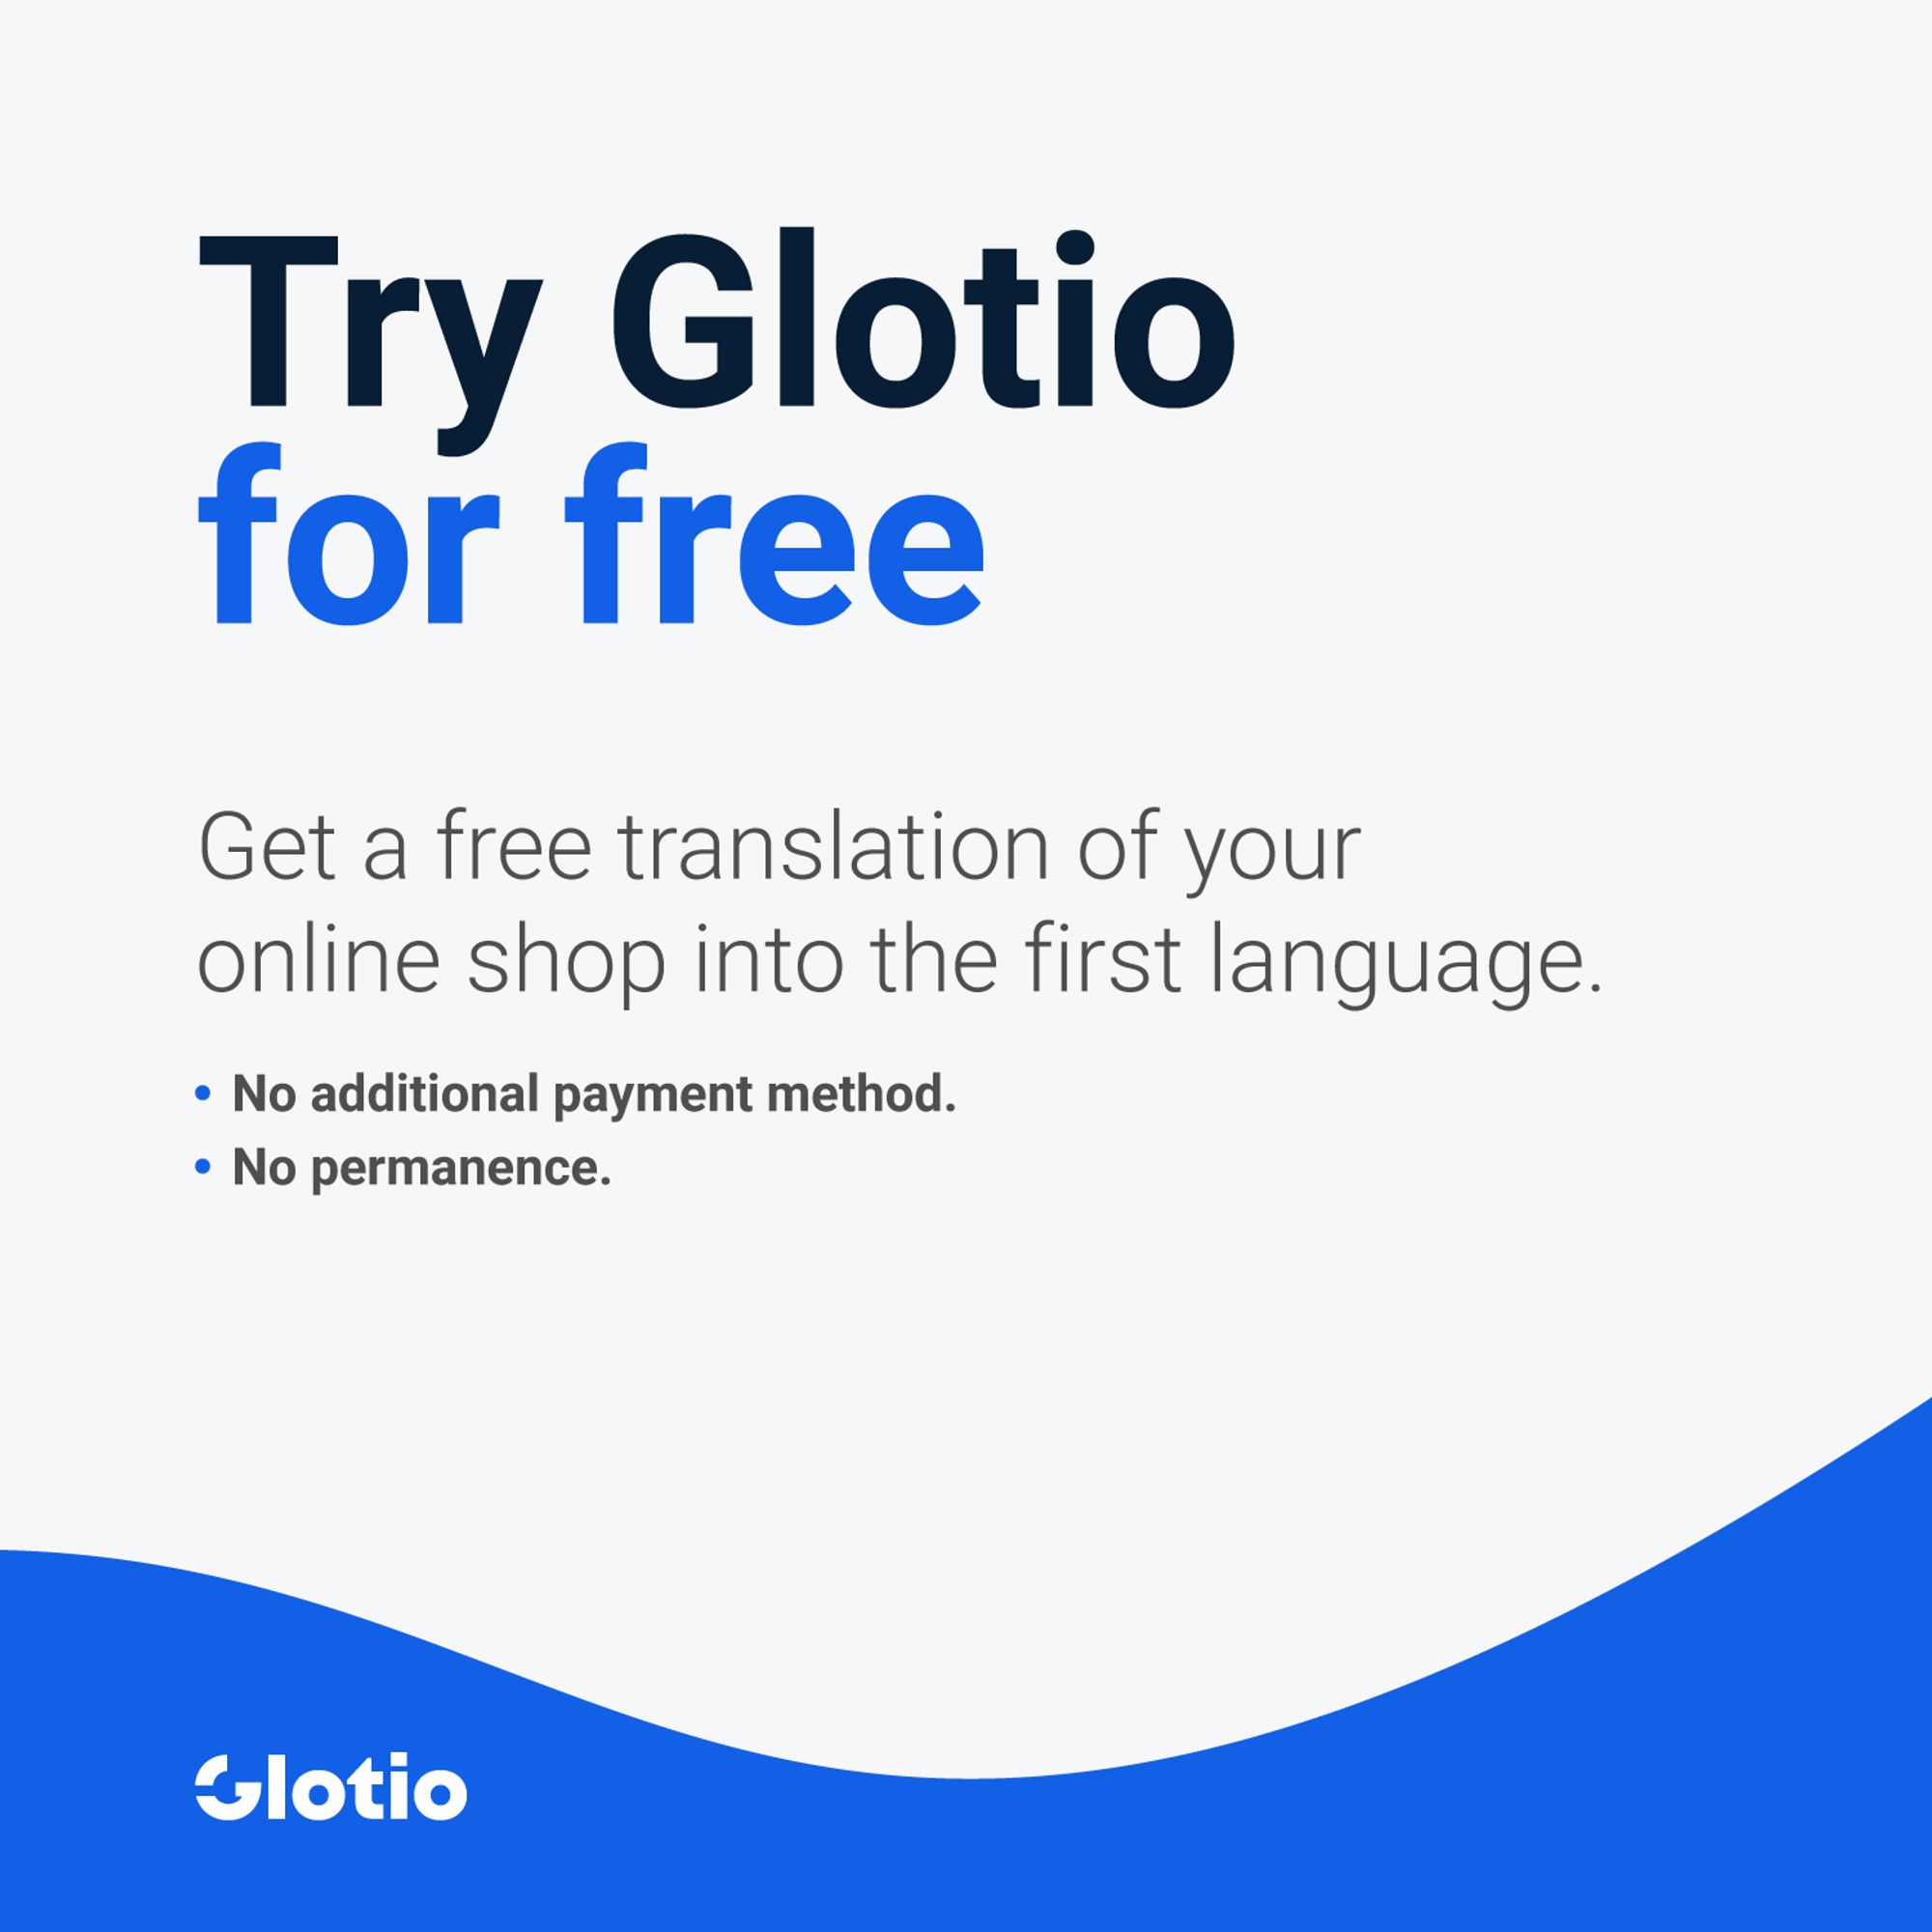 Download the module and install it. After that you create your account. You will receive an email with a link to confirm. Once you did it, you can access in your Glotio account. Put email and password and welcome! The first translation ifs free